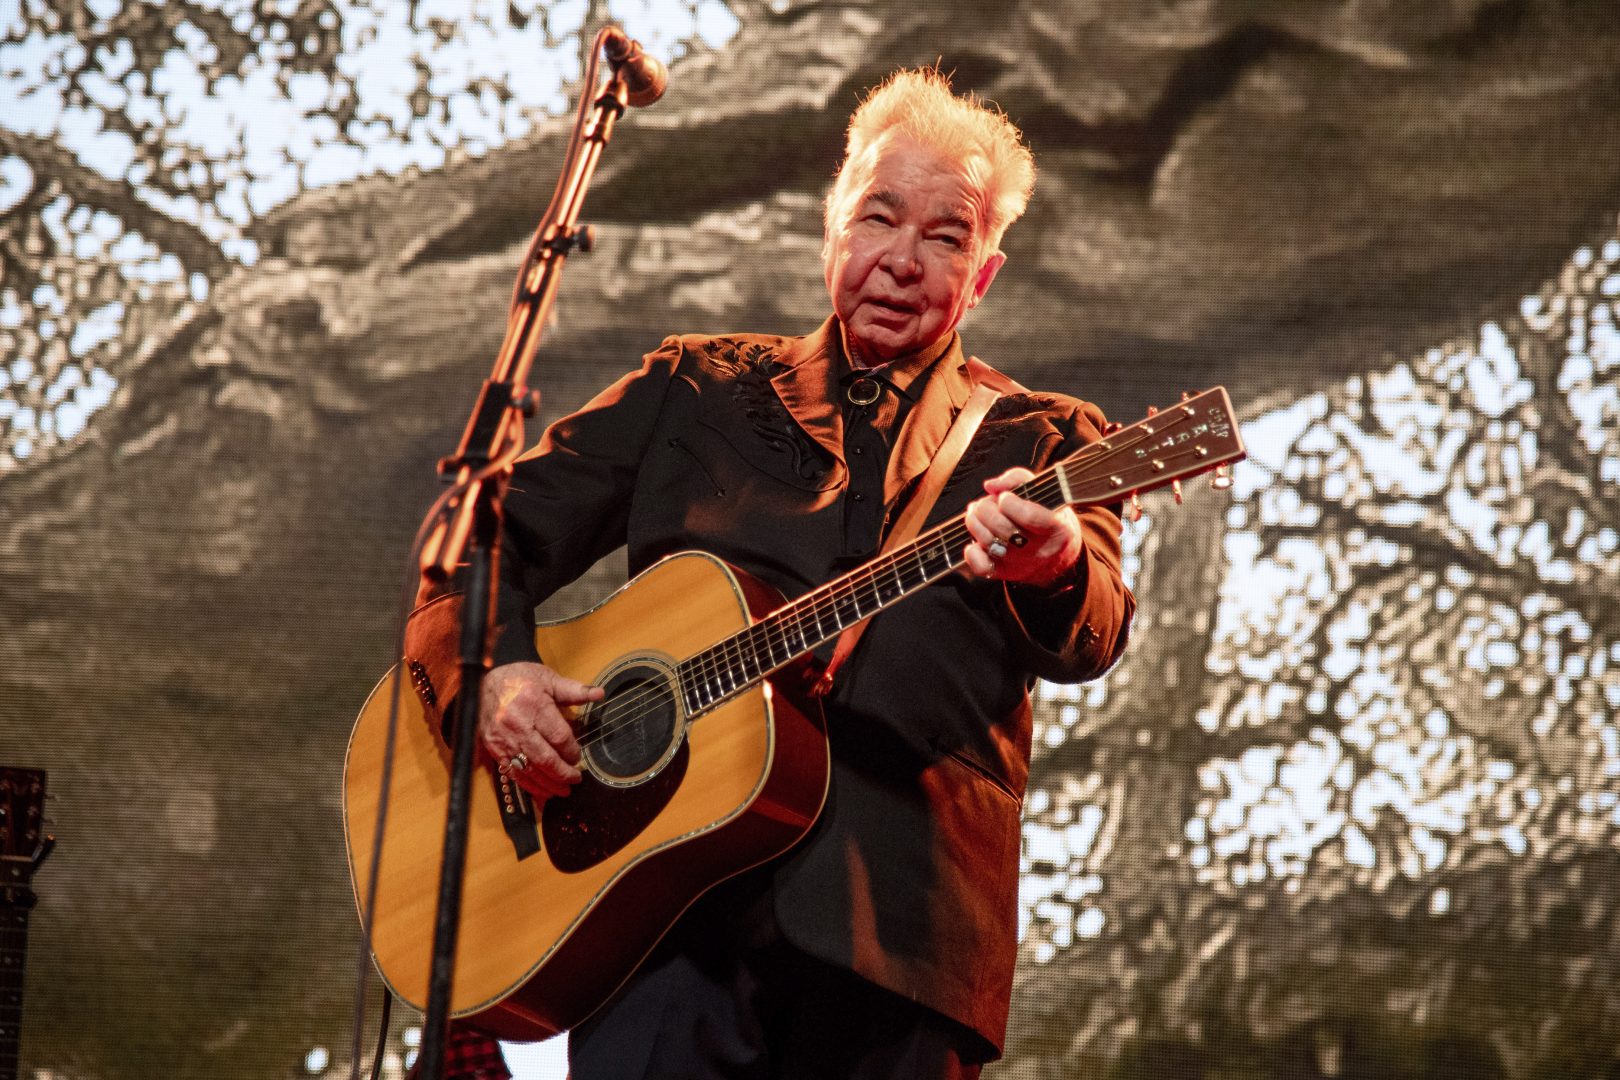 FILE - This June 15, 2019 file photo shows John Prine performing at the Bonnaroo Music and Arts Festival in Manchester, Tenn.  Prine died Tuesday, April 7, 2020, from complications of the coronavirus. He was 73.  